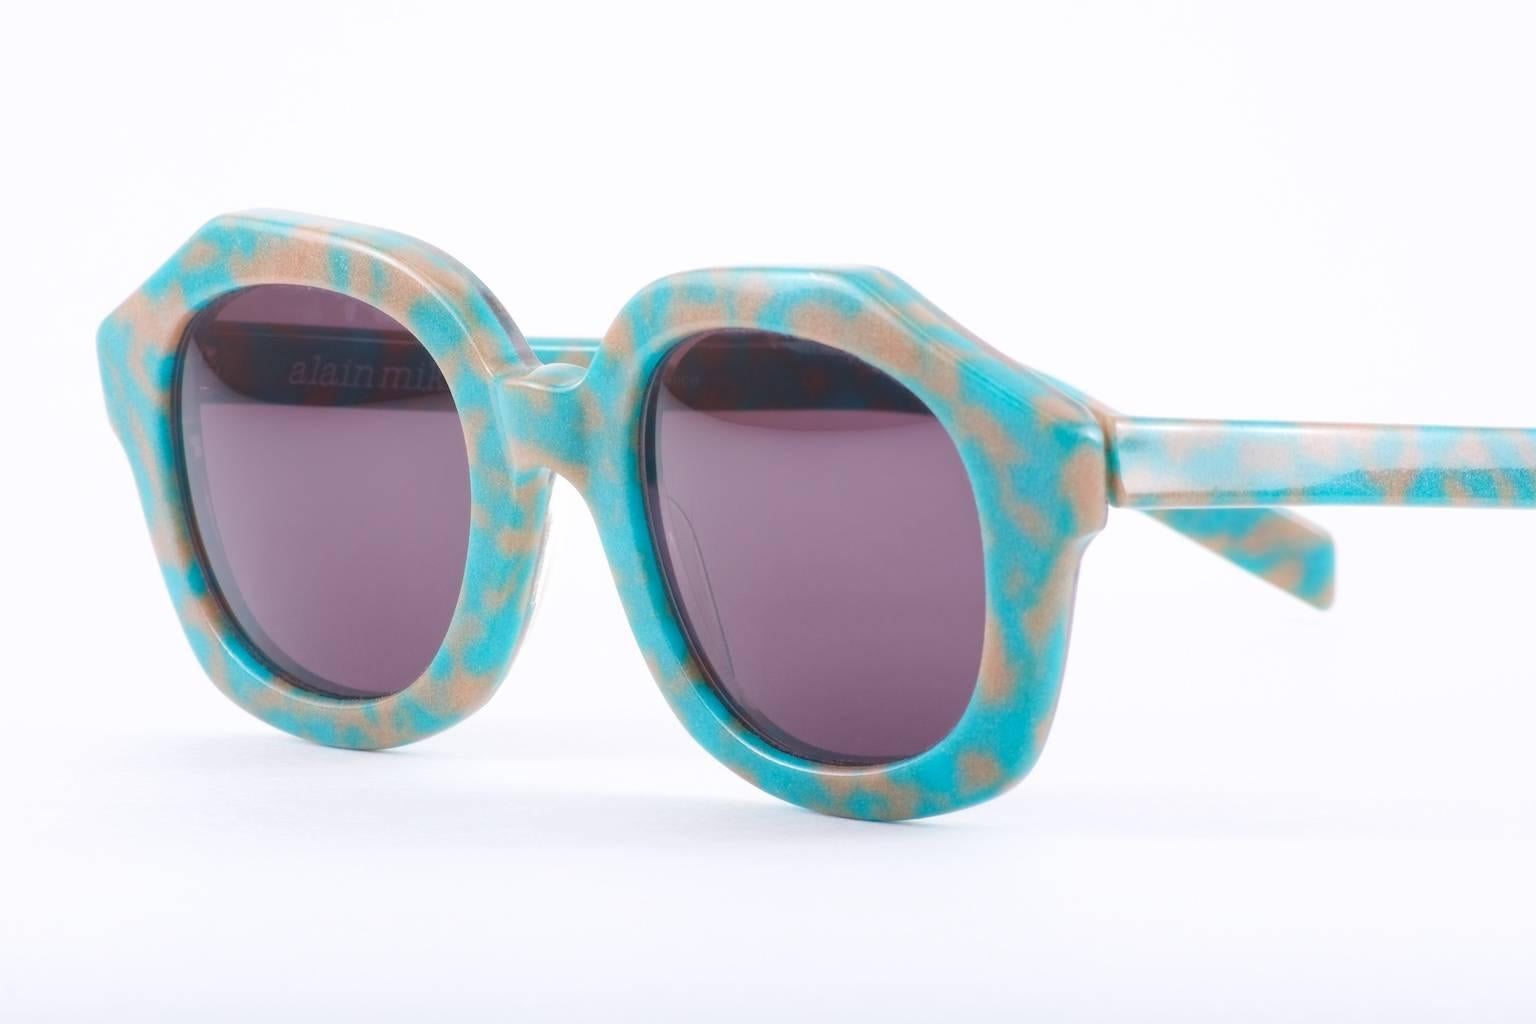 Vintage Alain Mikli sunglasses with these glow-in-the-dark. The sunglasses are blue/teal with grey in daylight but give off a funky green glow in the dark...

